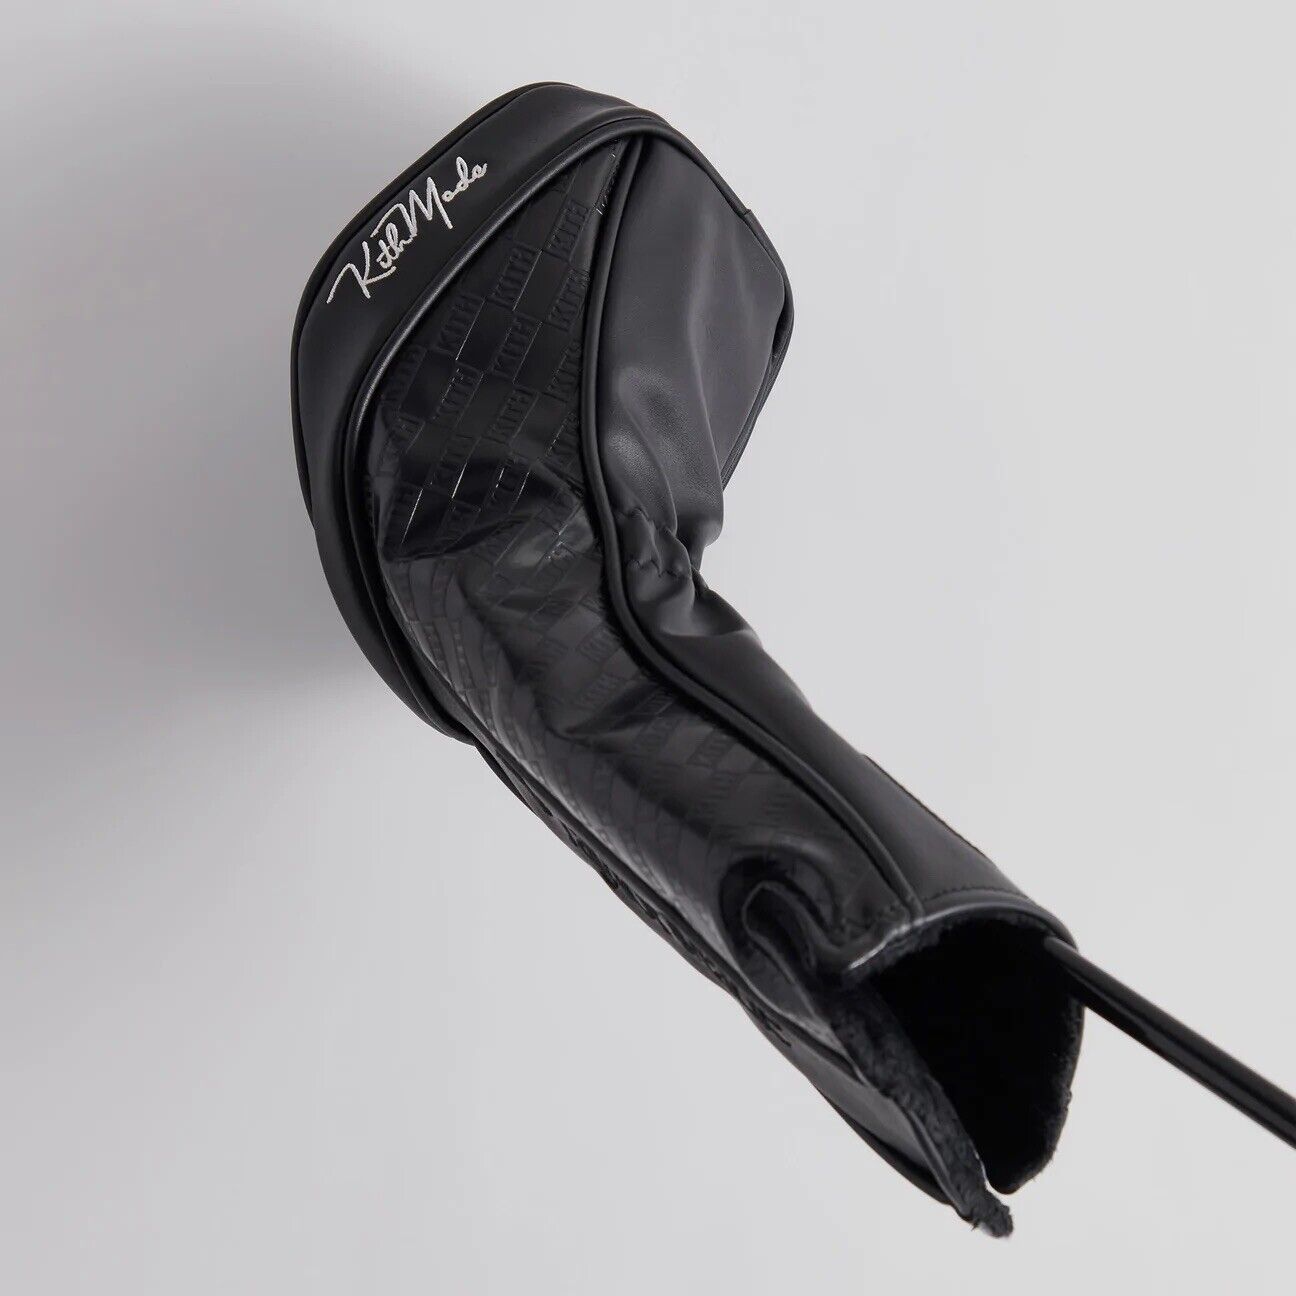 Kith for TaylorMade Stealth Plus Carbonwood Driver (10.5 Loft) | eBay